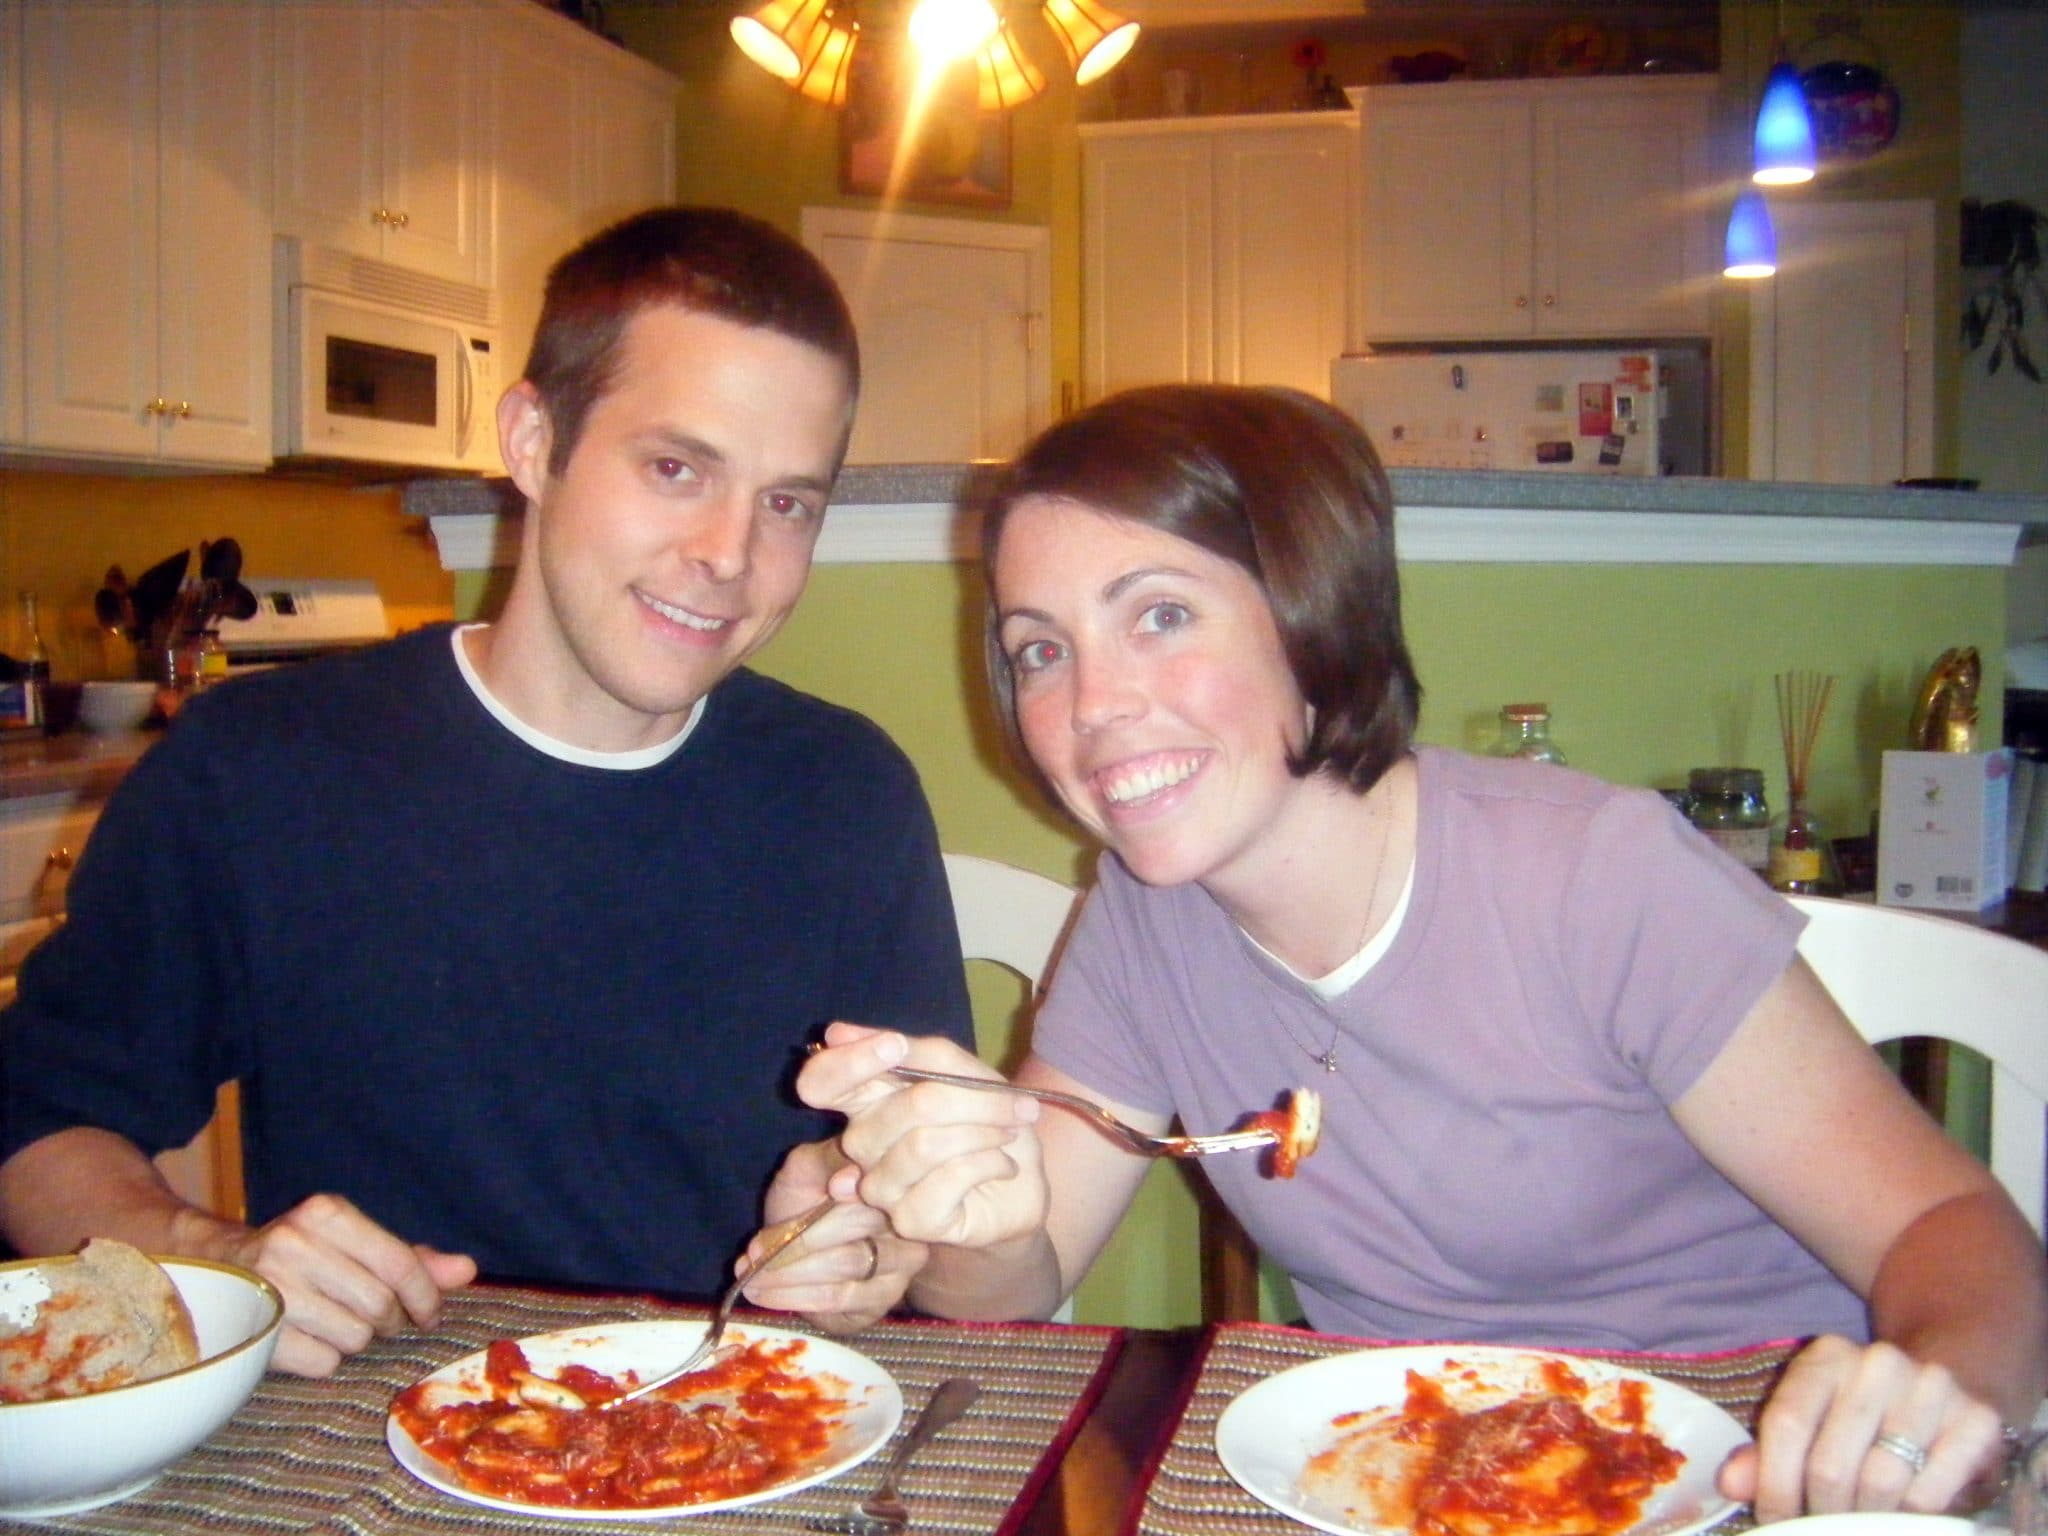 Man and woman eating dinner at table, smiling for camera